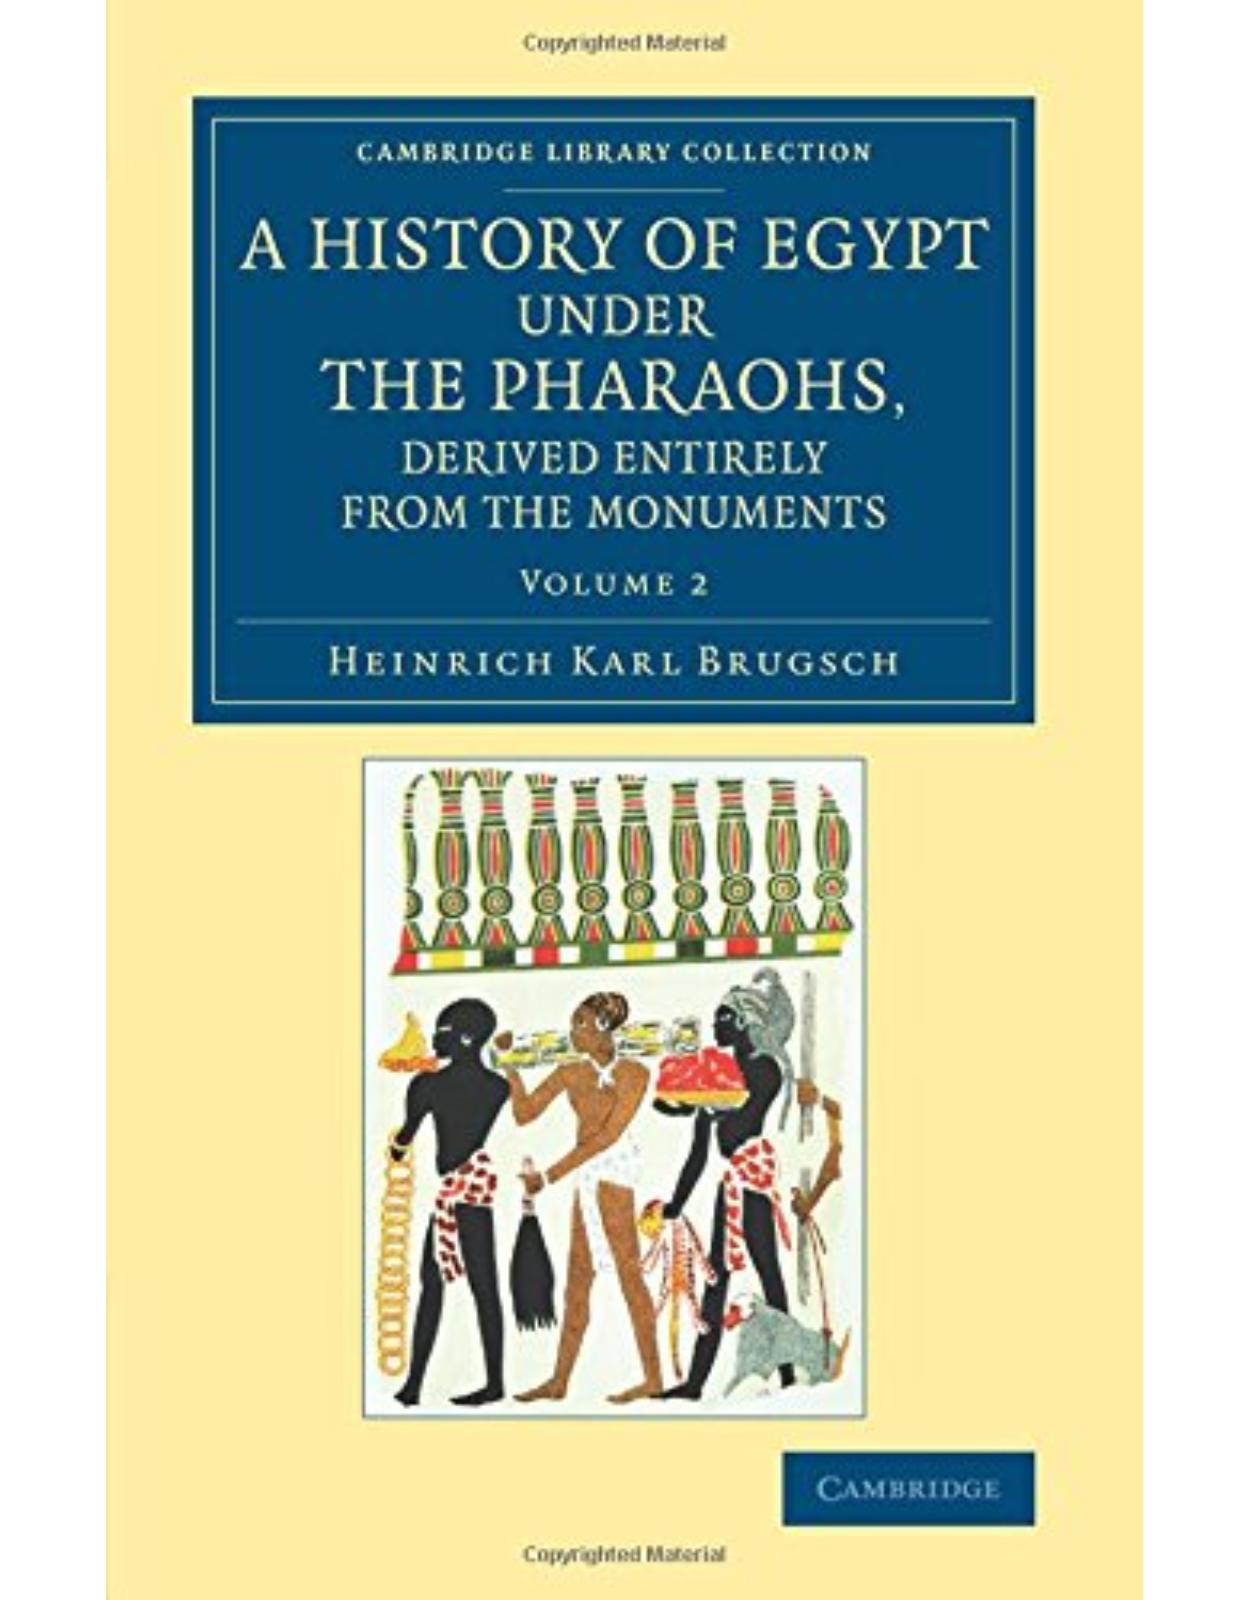 A History of Egypt under the Pharaohs, Derived Entirely from the Monuments: Volume 2: To Which Is Added a Memoir on the Exodus of the Israelites and ... (Cambridge Library Collection - Egyptology)